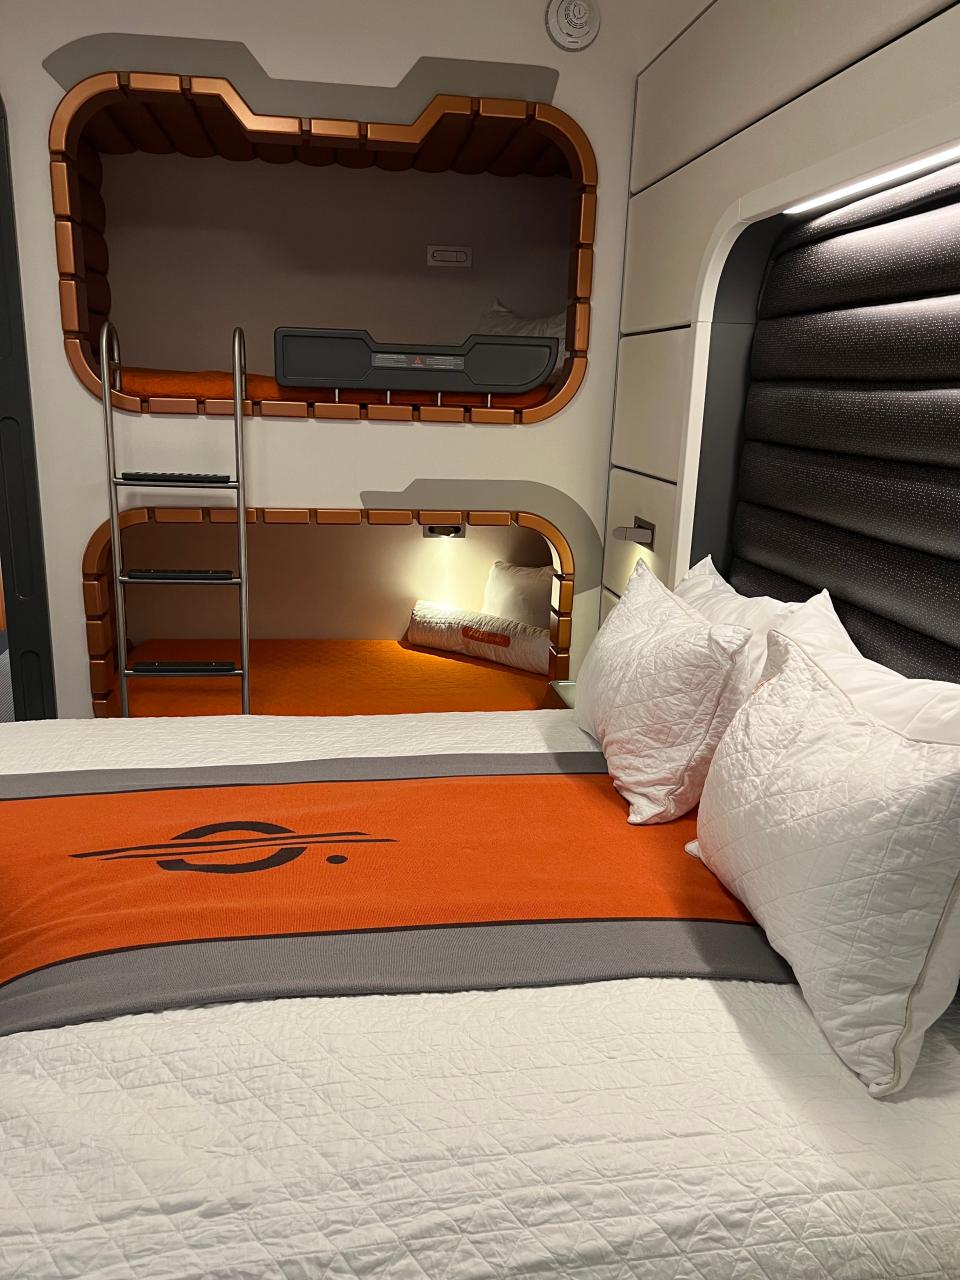 The interior of the Starcruiser room with white sheets and an orange design on top and bunk beds built into the wall